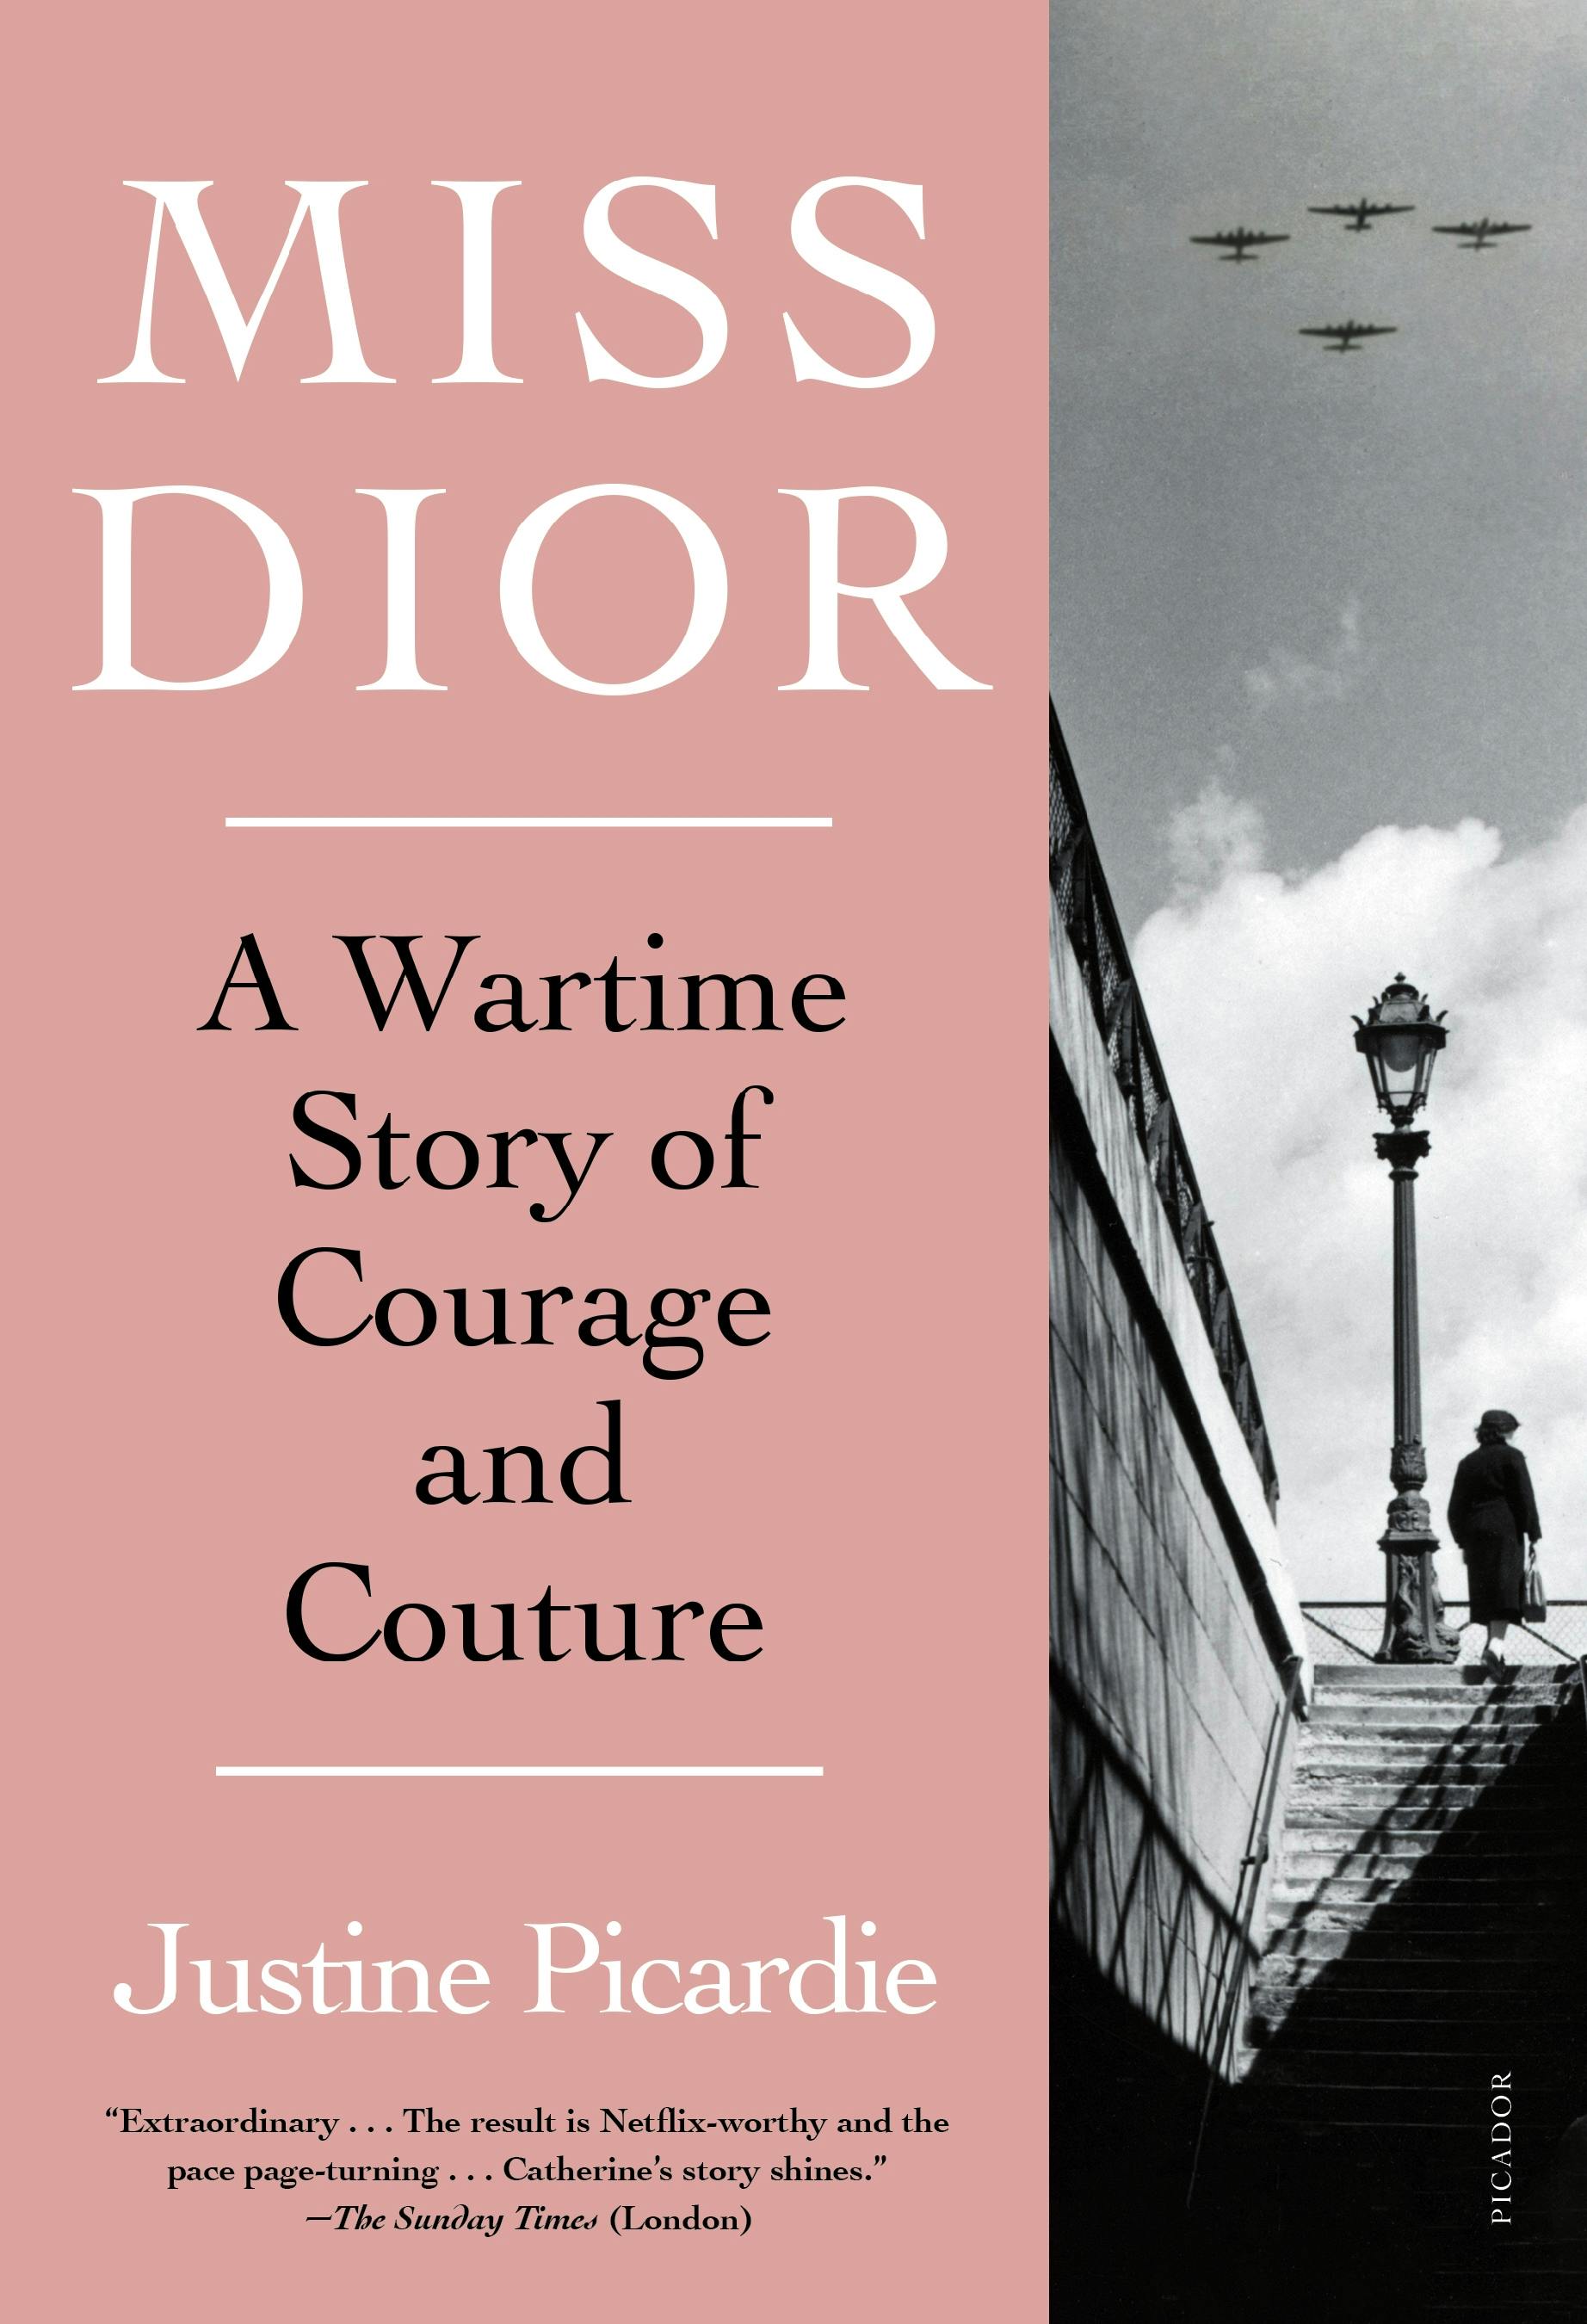 What Dior Perfume is Best? Nurturing The Legacy of Nostalgia